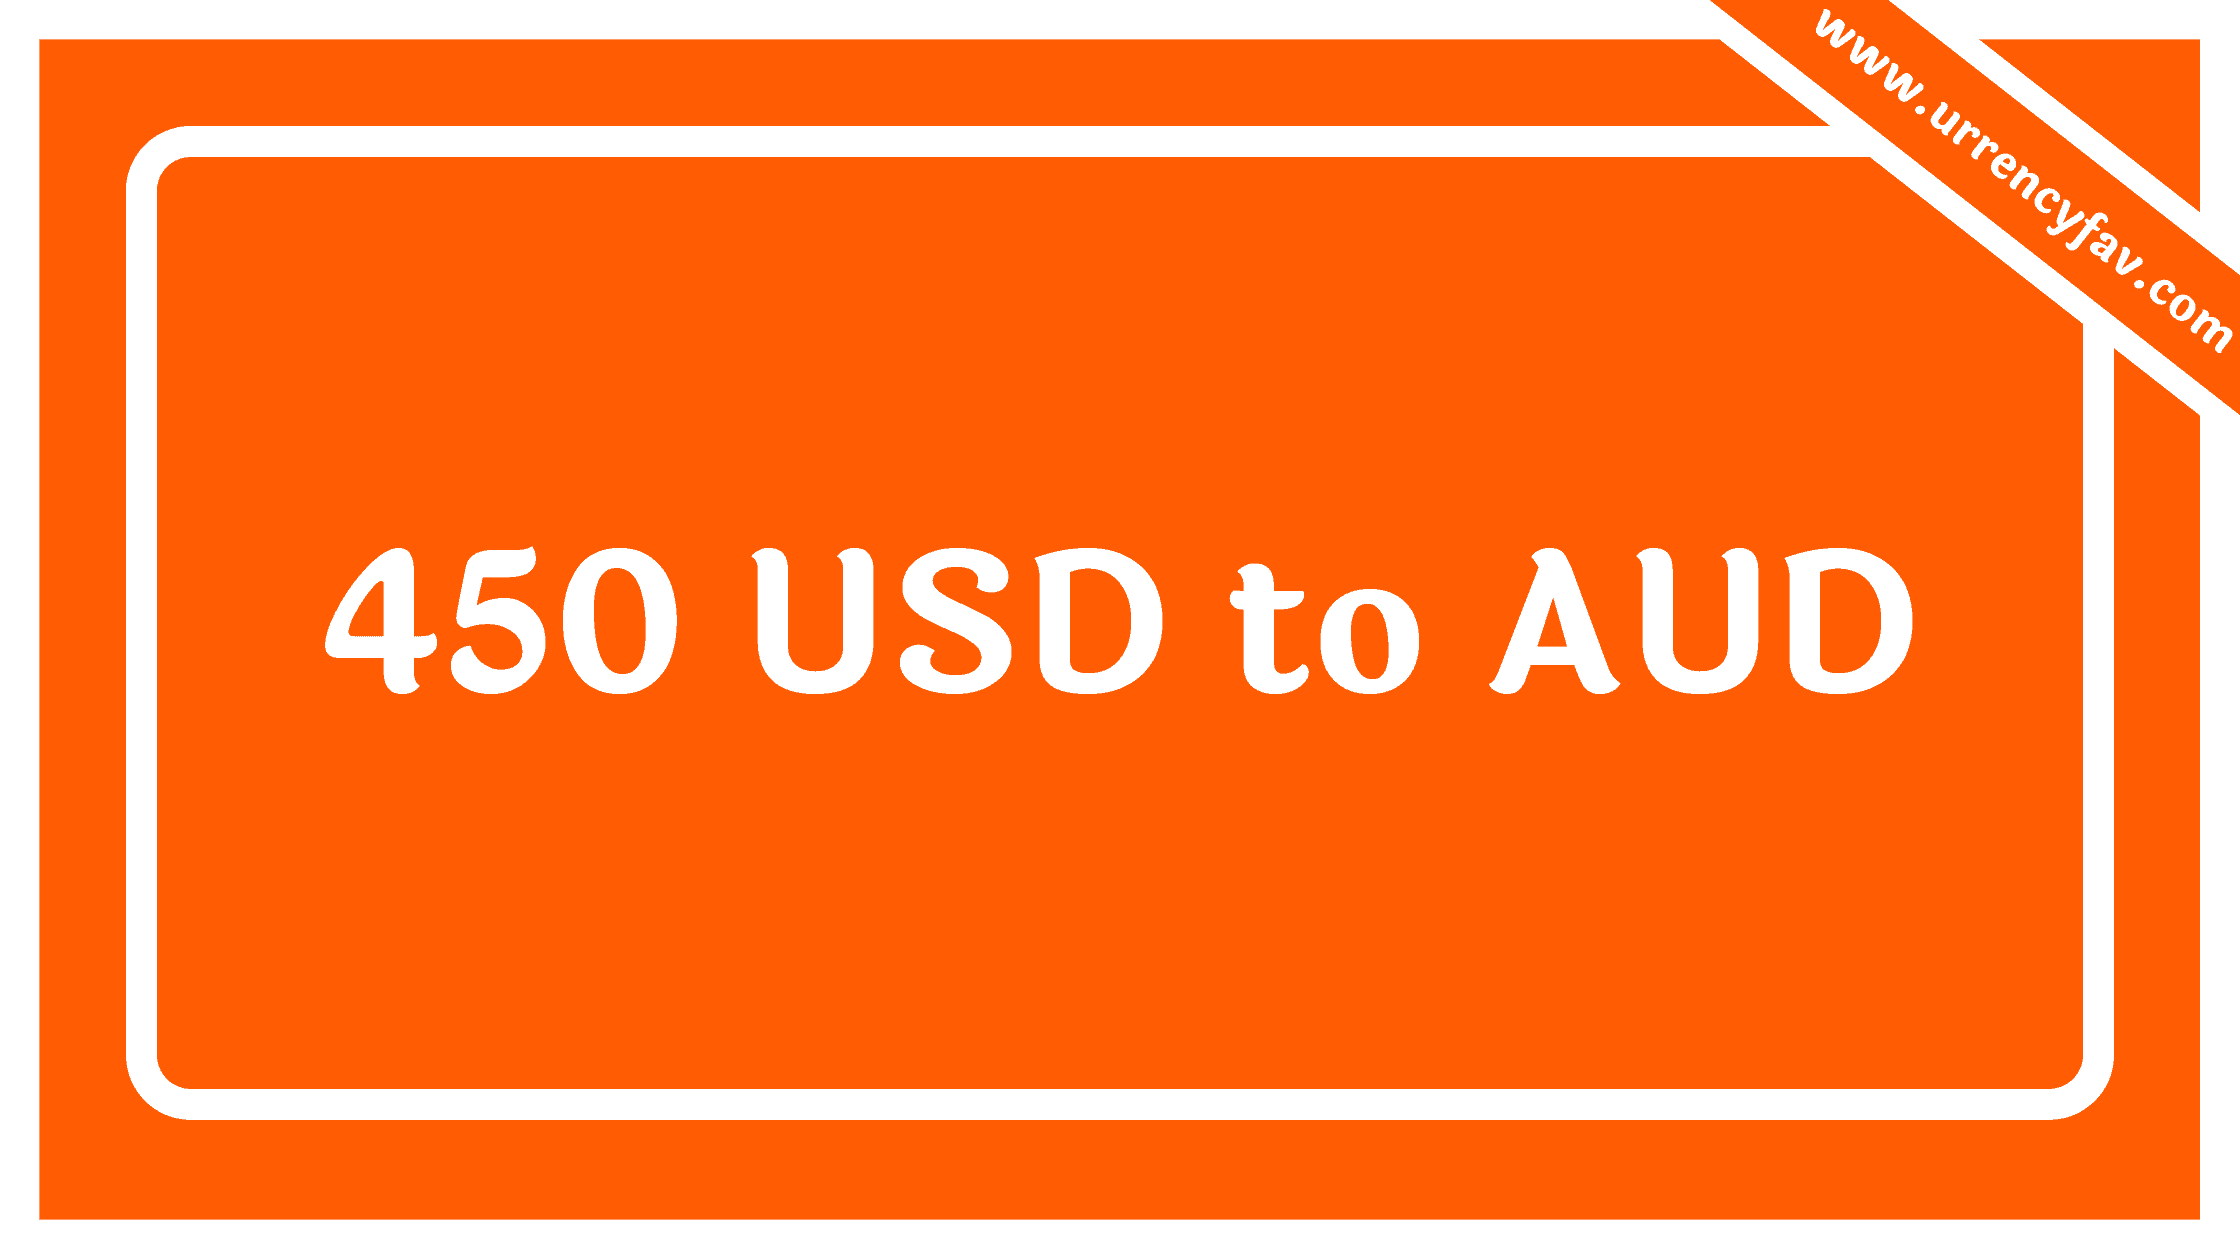 450 USD to AUD